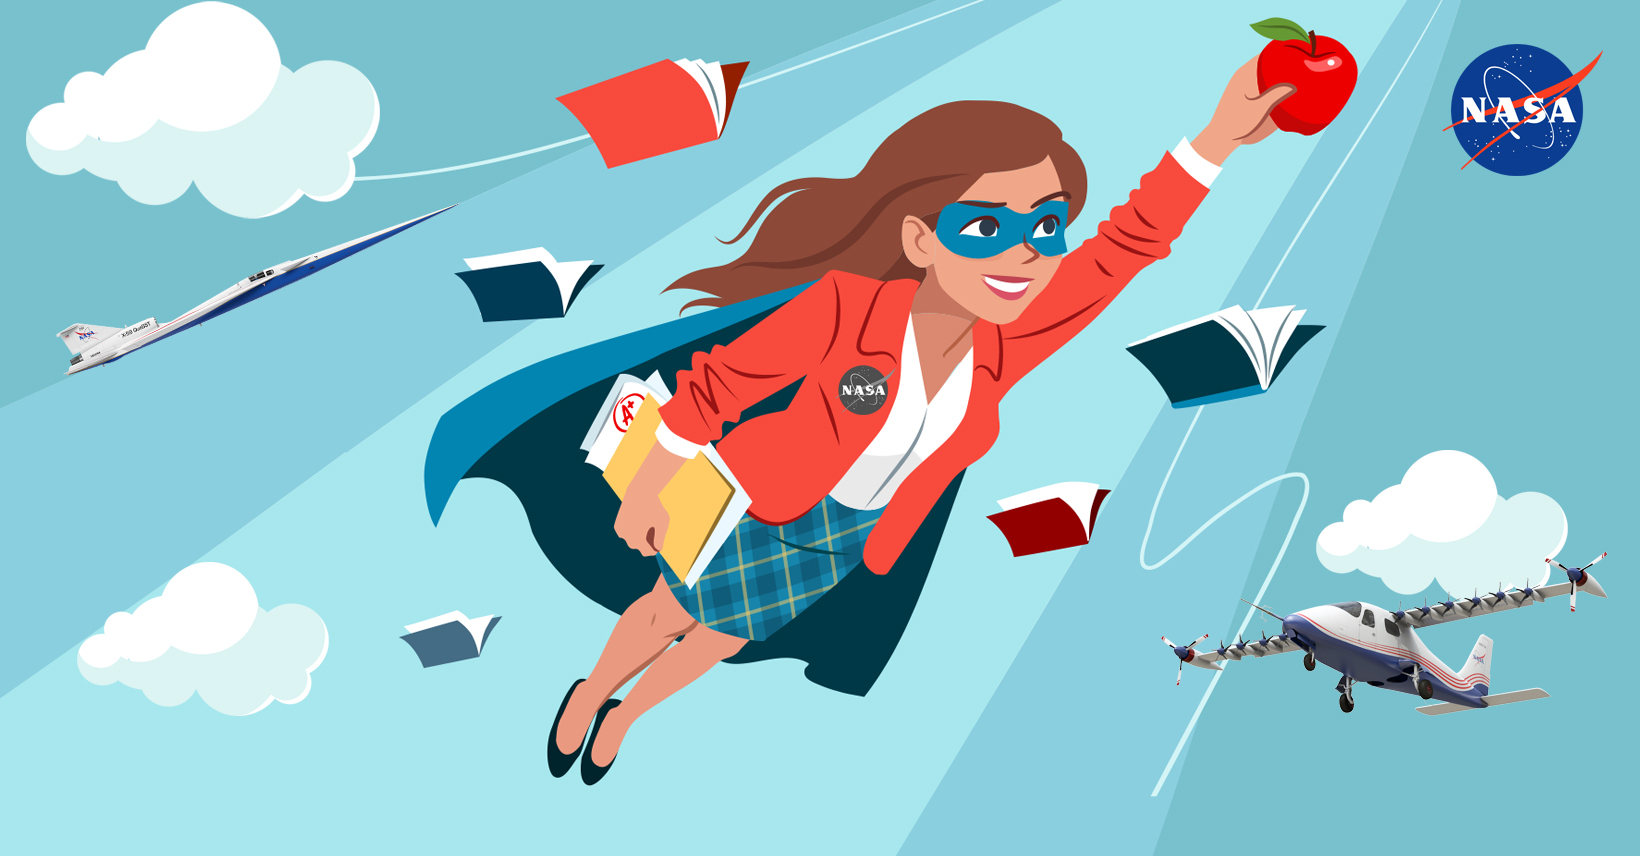 Illustration of a superhero teacher in flight with books and the X-59 and X-57 aircraft in flight as well.